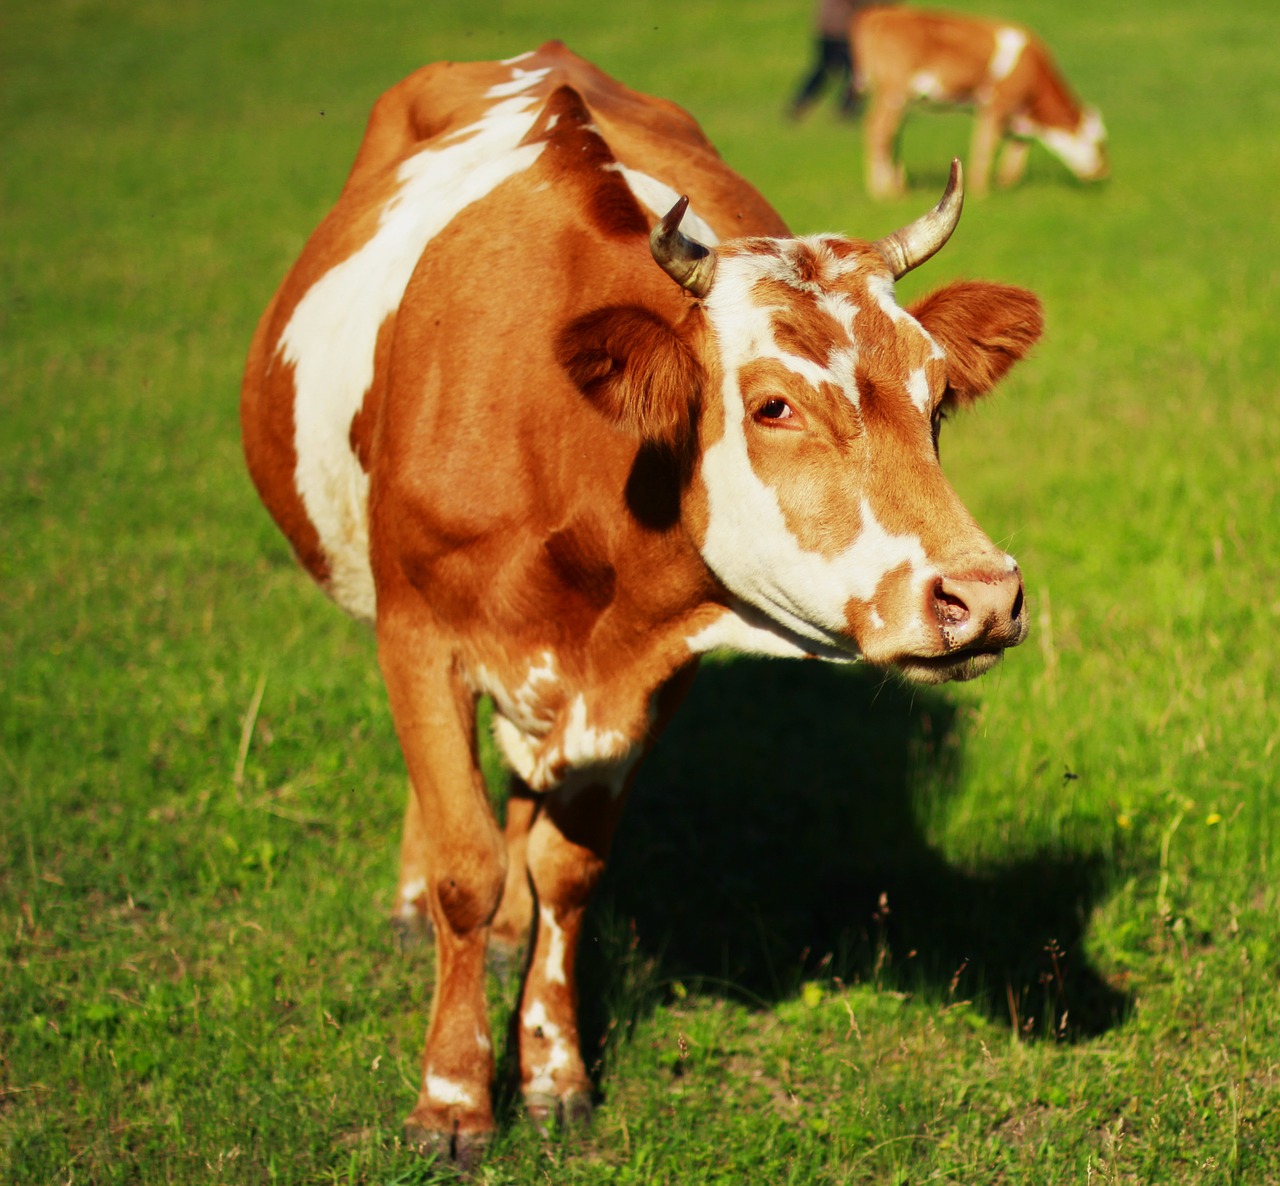 animal cow yellow cattle free photo